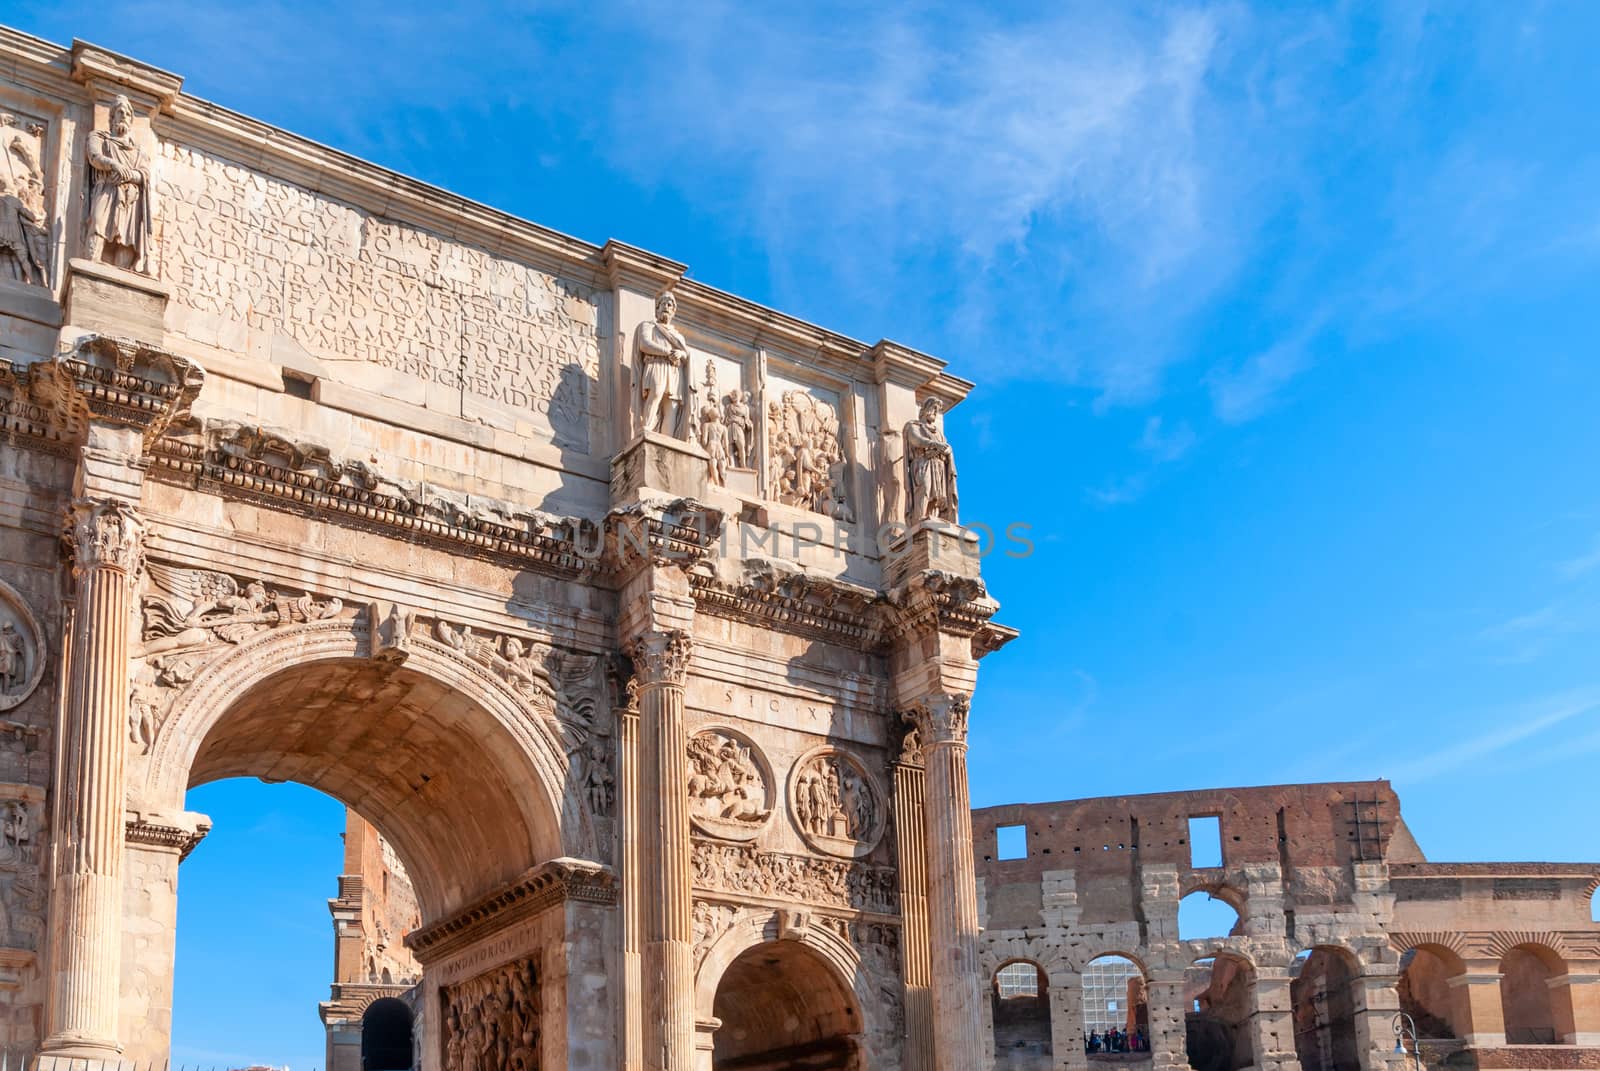 Arch of Constantine and Colosseum in Rome, Italy. Triumphal arch by Zhukow